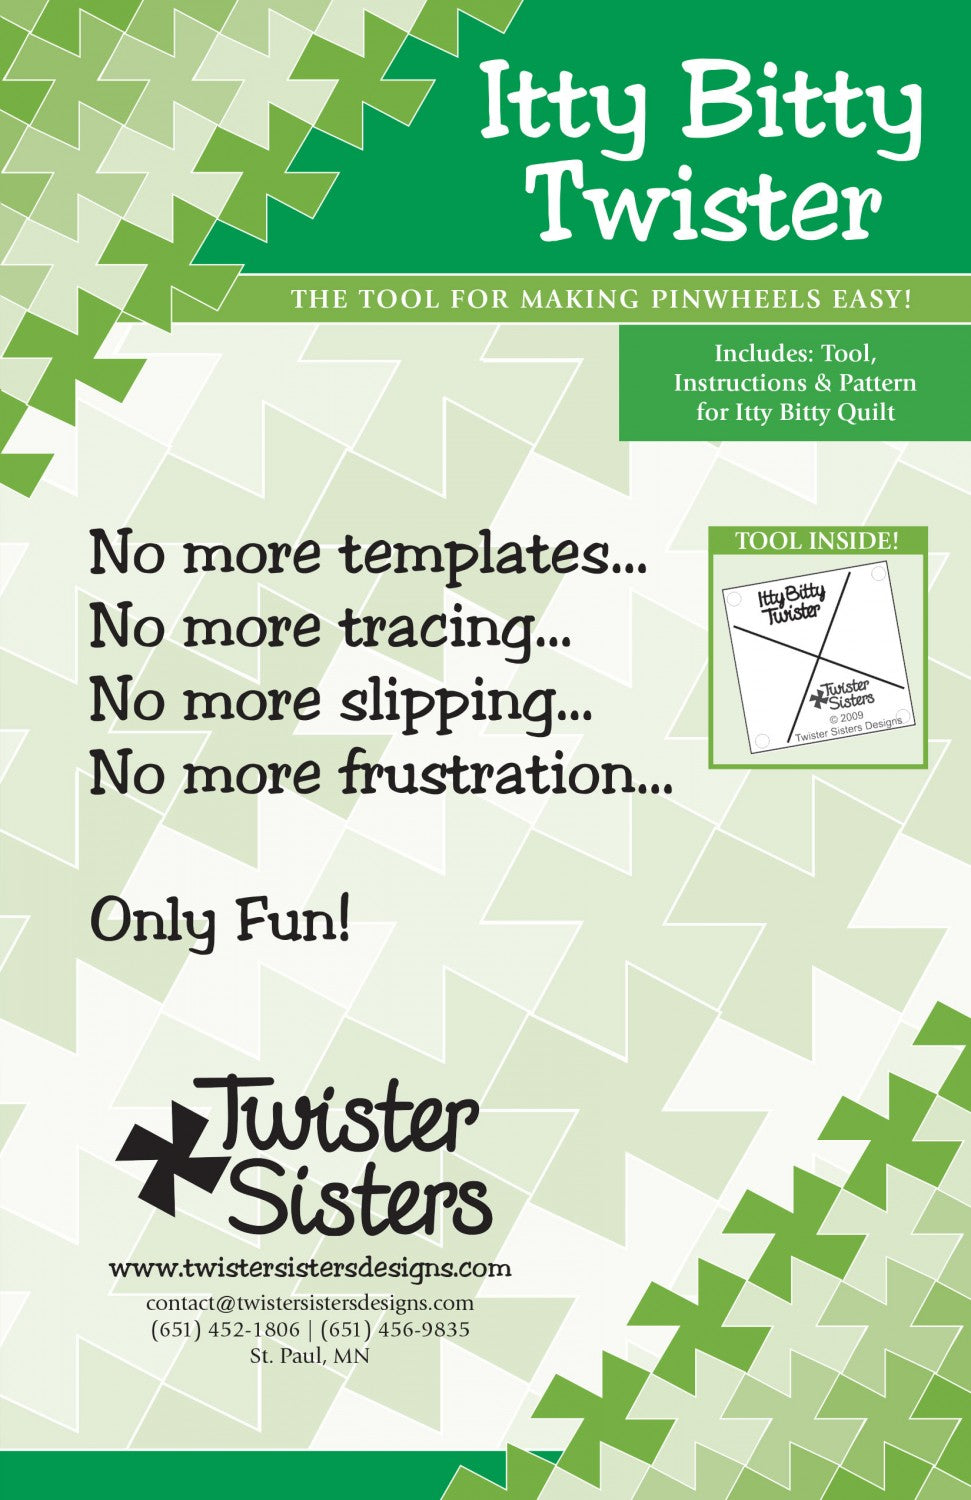 Itty Bitty Twister Ruler - 2-1/2" Squares